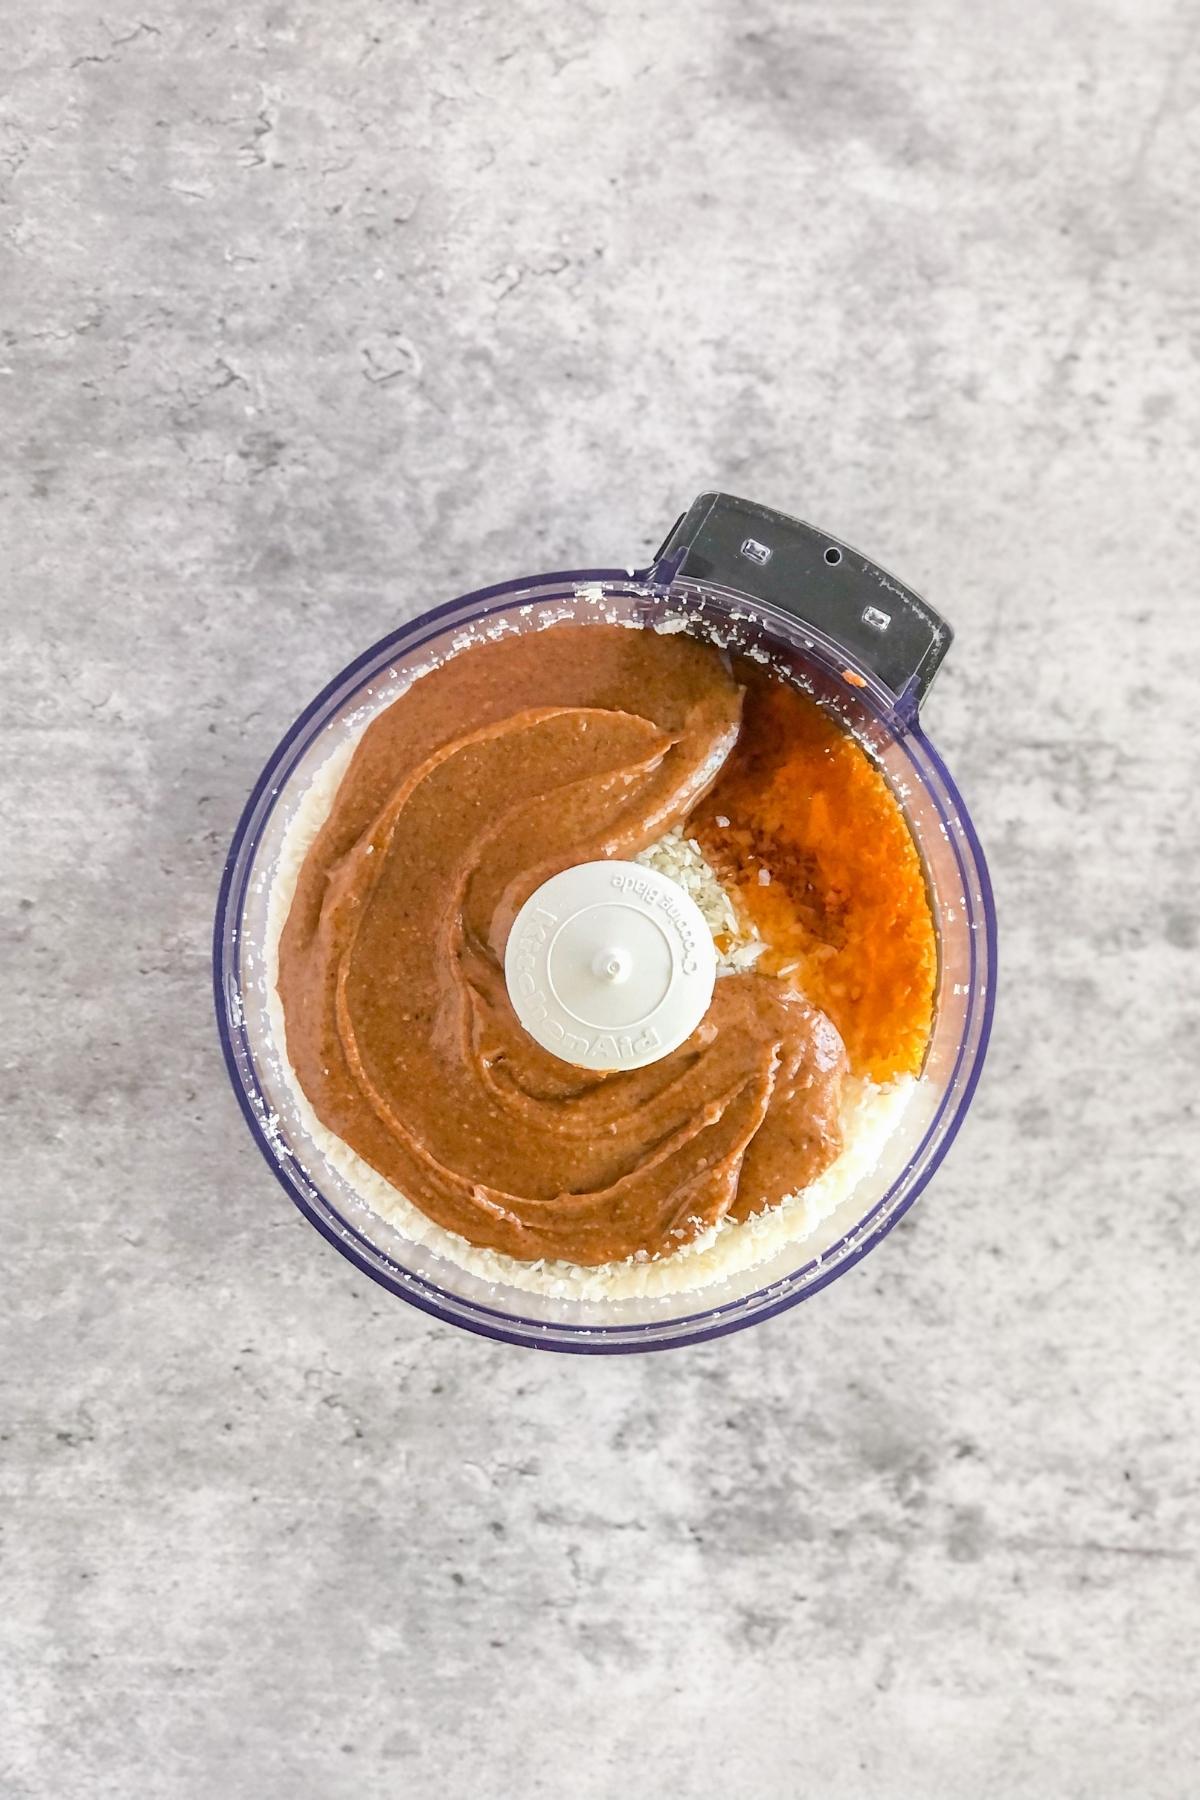 almond butter, shredded coconut, and maple syrup in a food processor